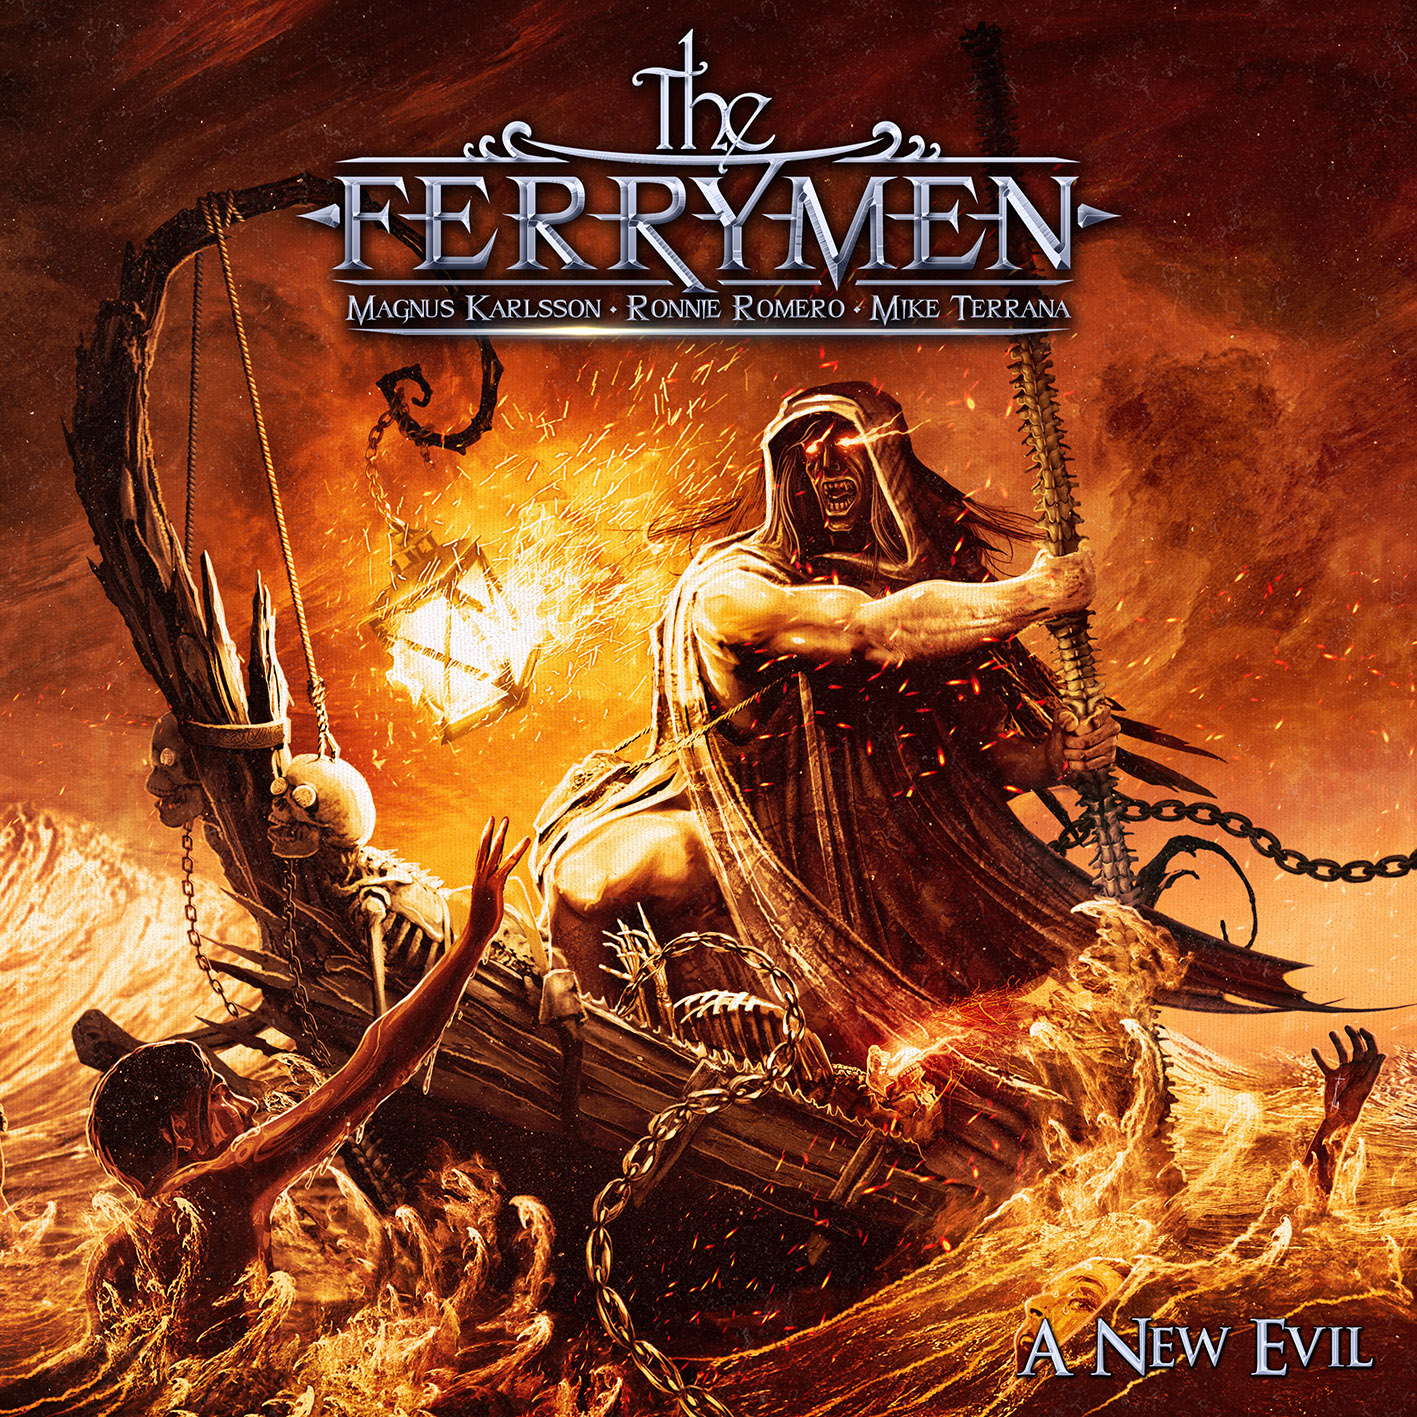 THE FERRYMEN  - “A New Evil” 